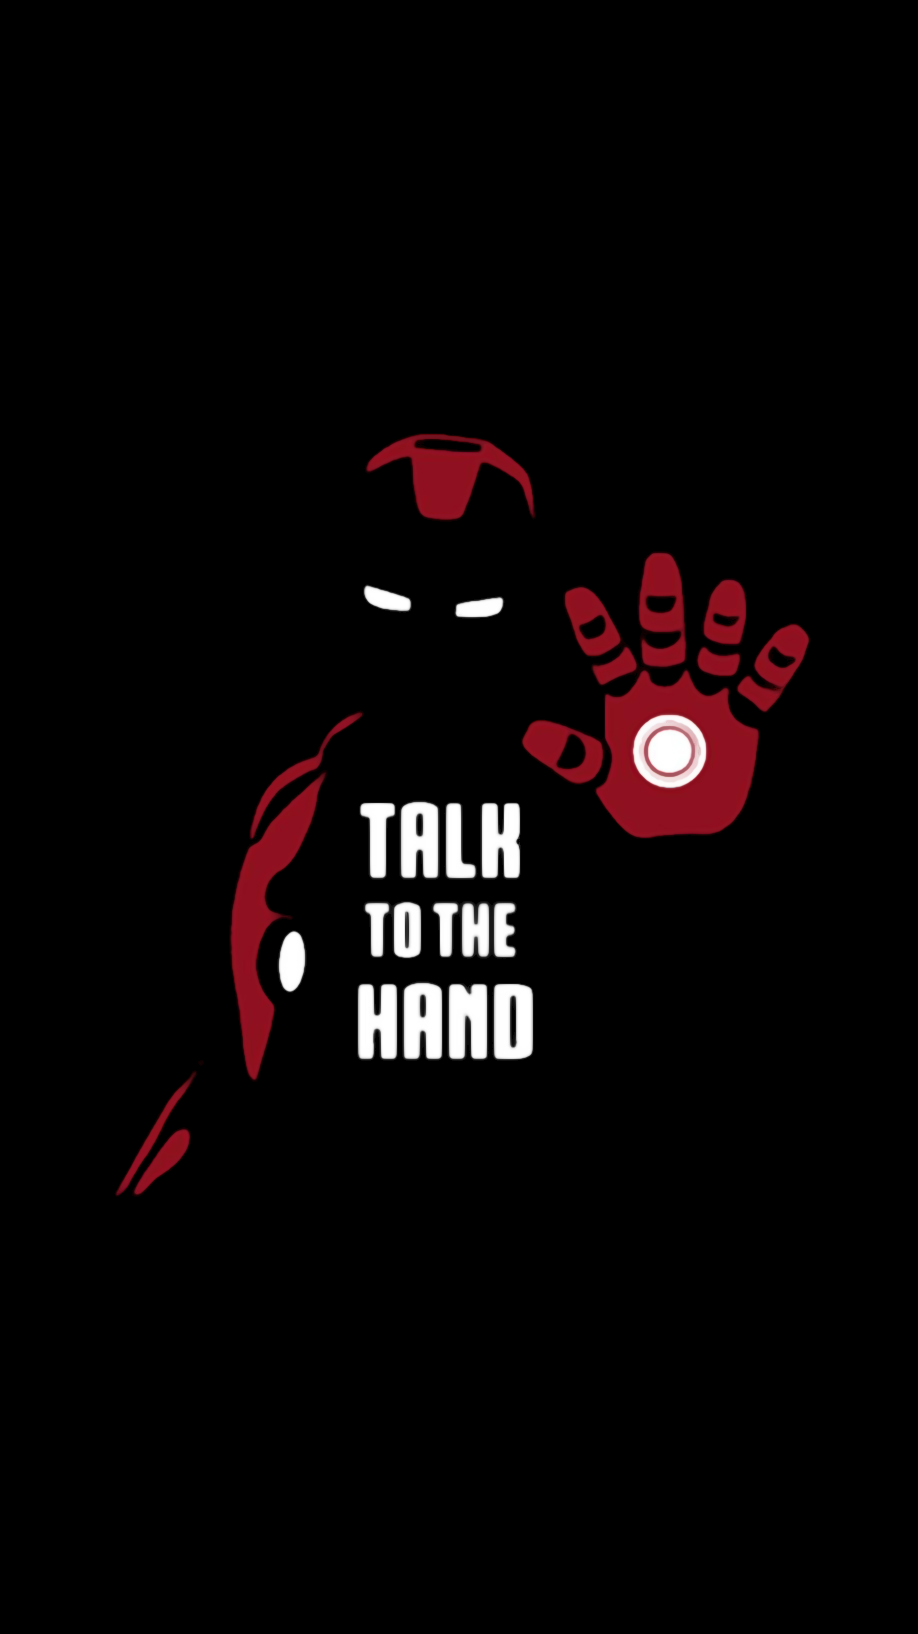 Talk to the hand [918x1634] (i.redd.it) submitted by d_ope to /r